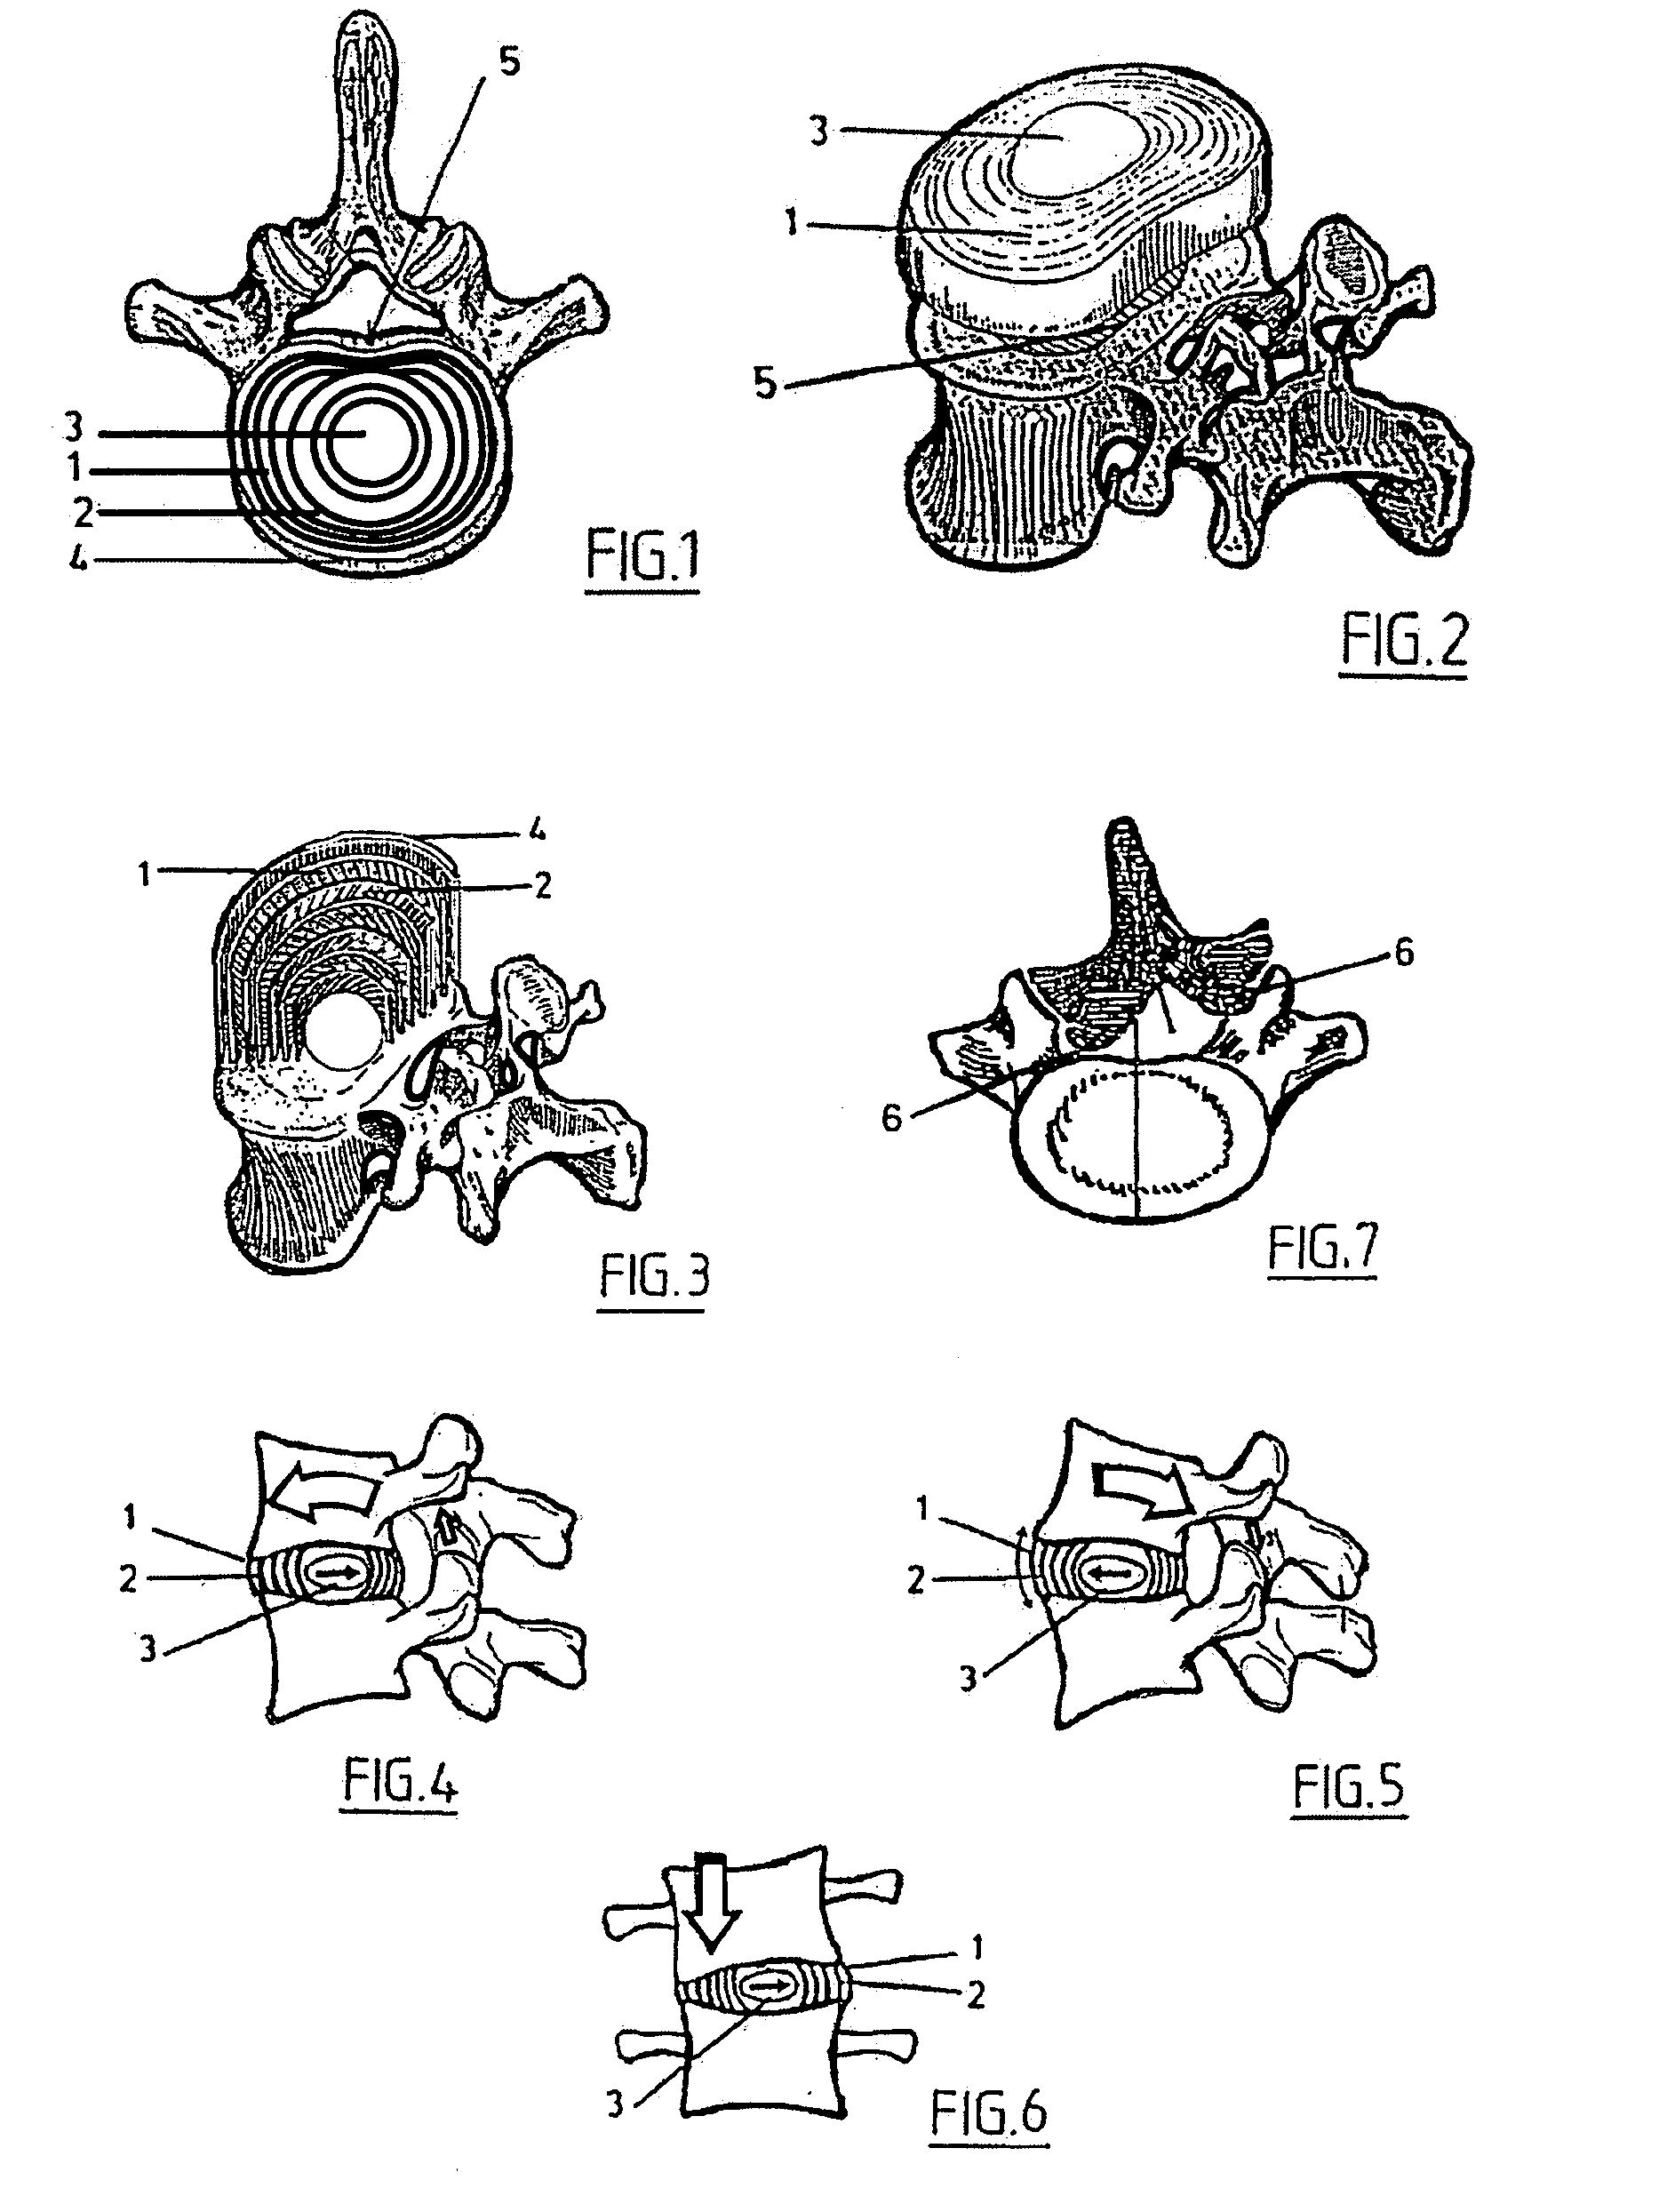 Intervertebral nucleus prosthesis and surgical procedure for implanting the same